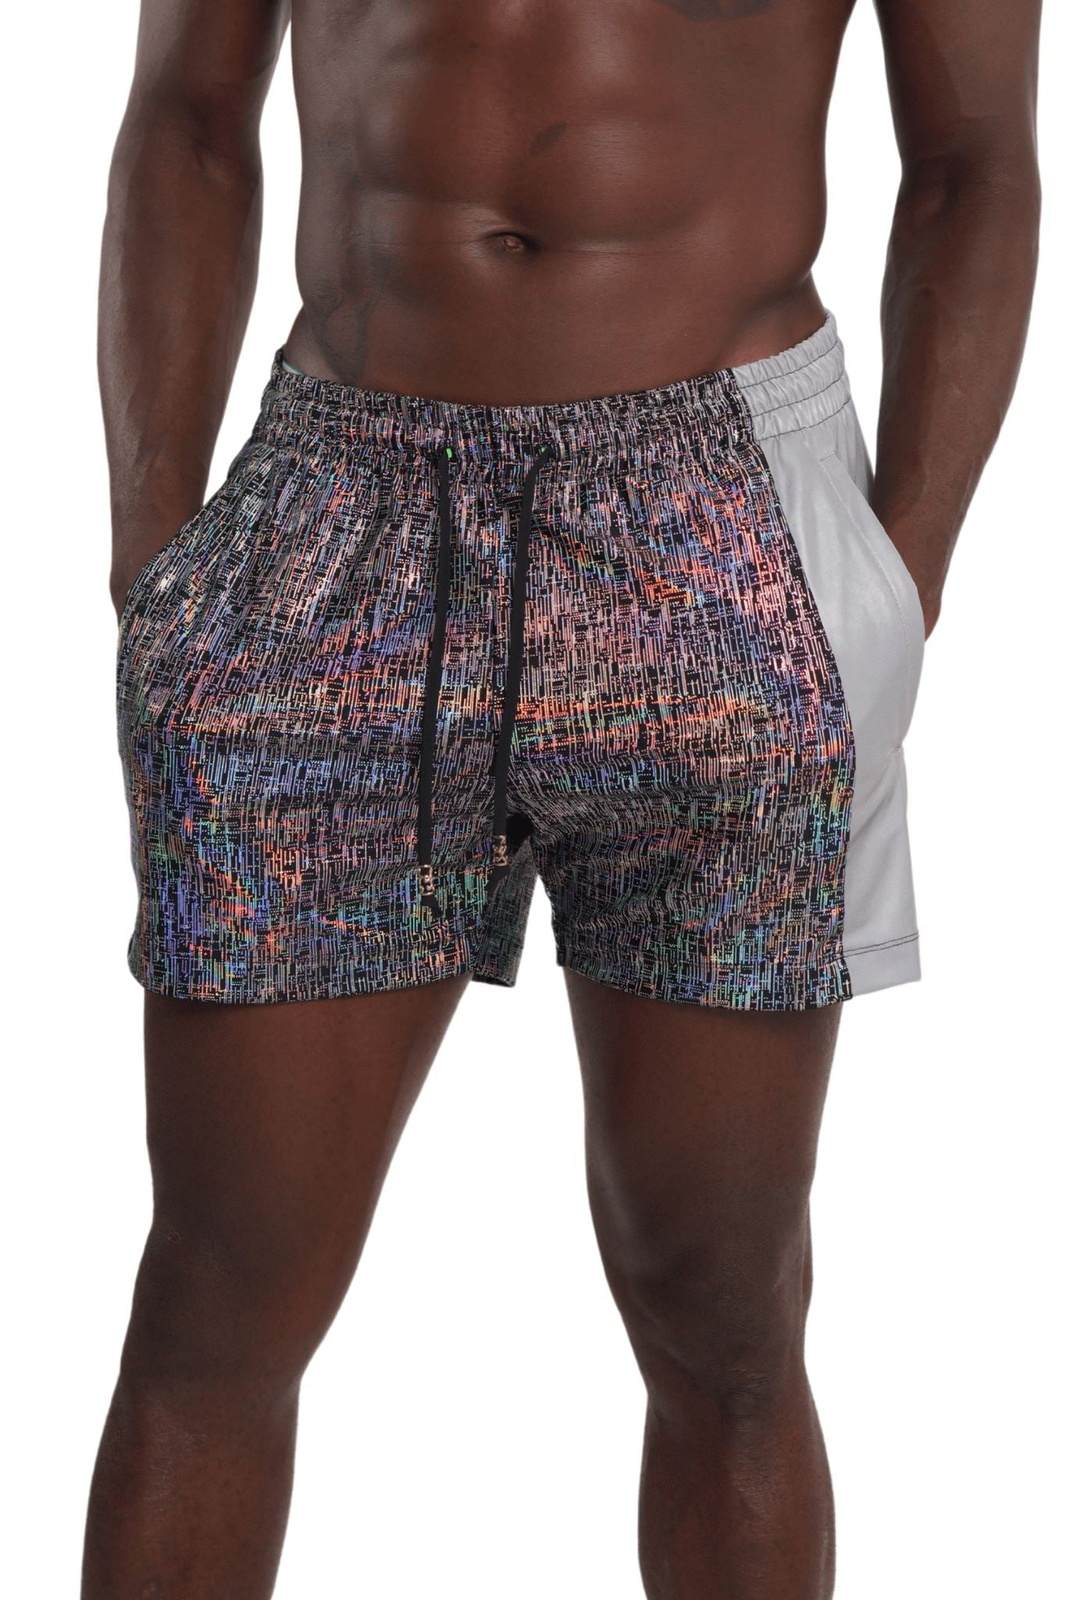 Mens holographic silver drawstring shorts with liner for festival wear from Love Khaos.